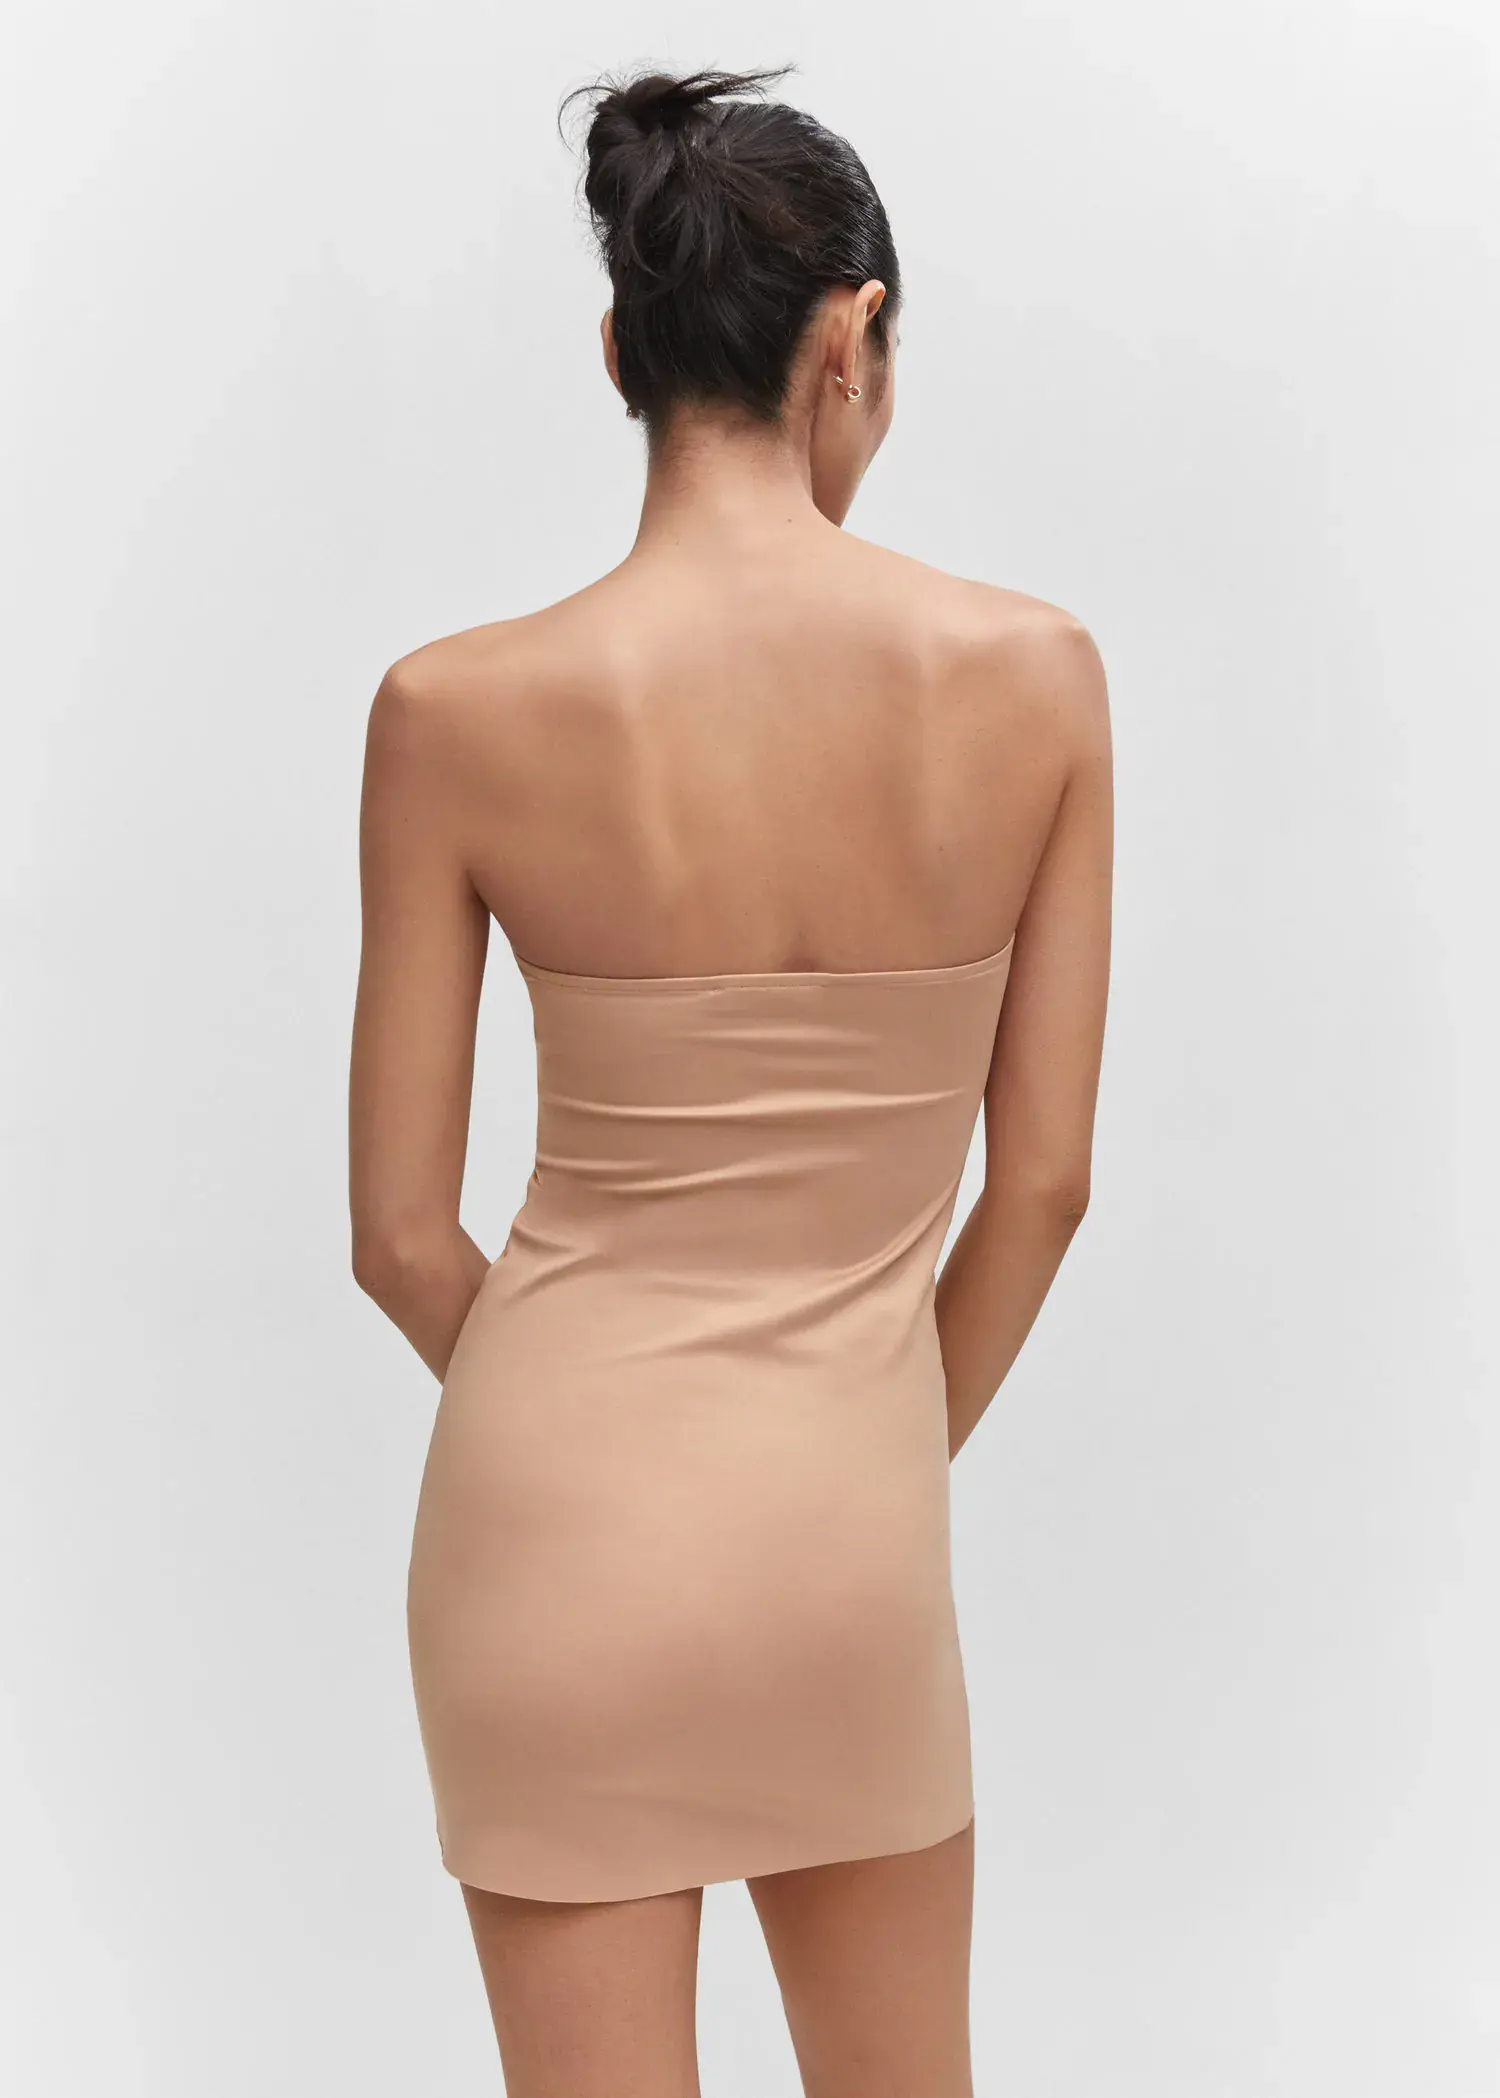 Mango Seamless strapless dress. a woman in a tan dress standing in front of a white wall. 